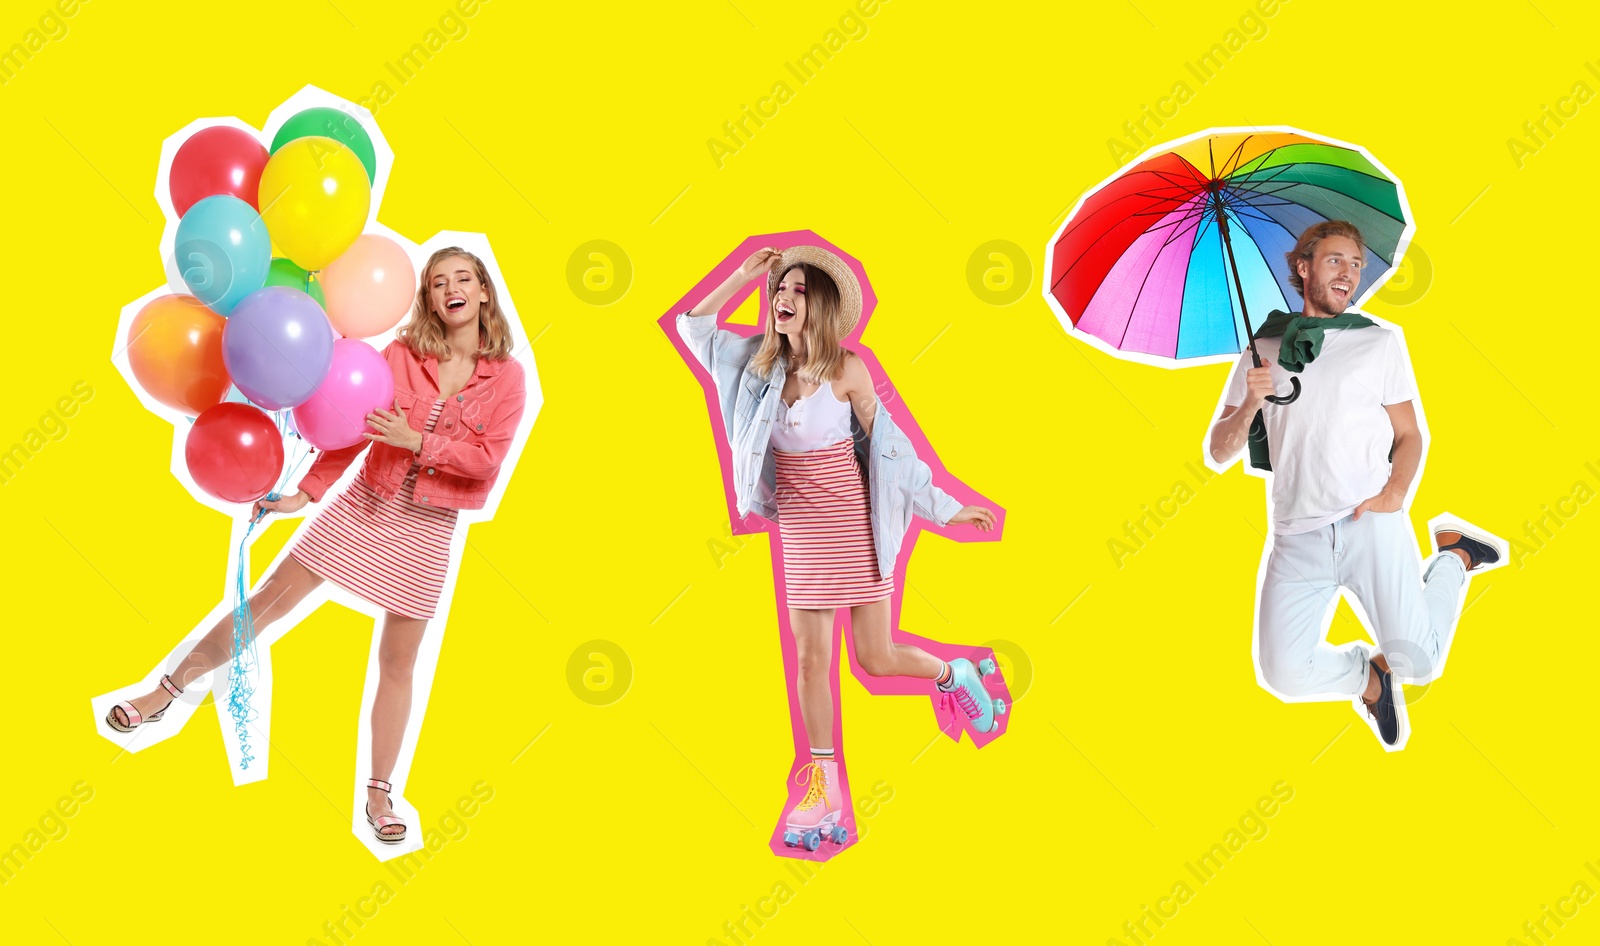 Image of Pop art poster. Happy women and man on yellow background. Banner design